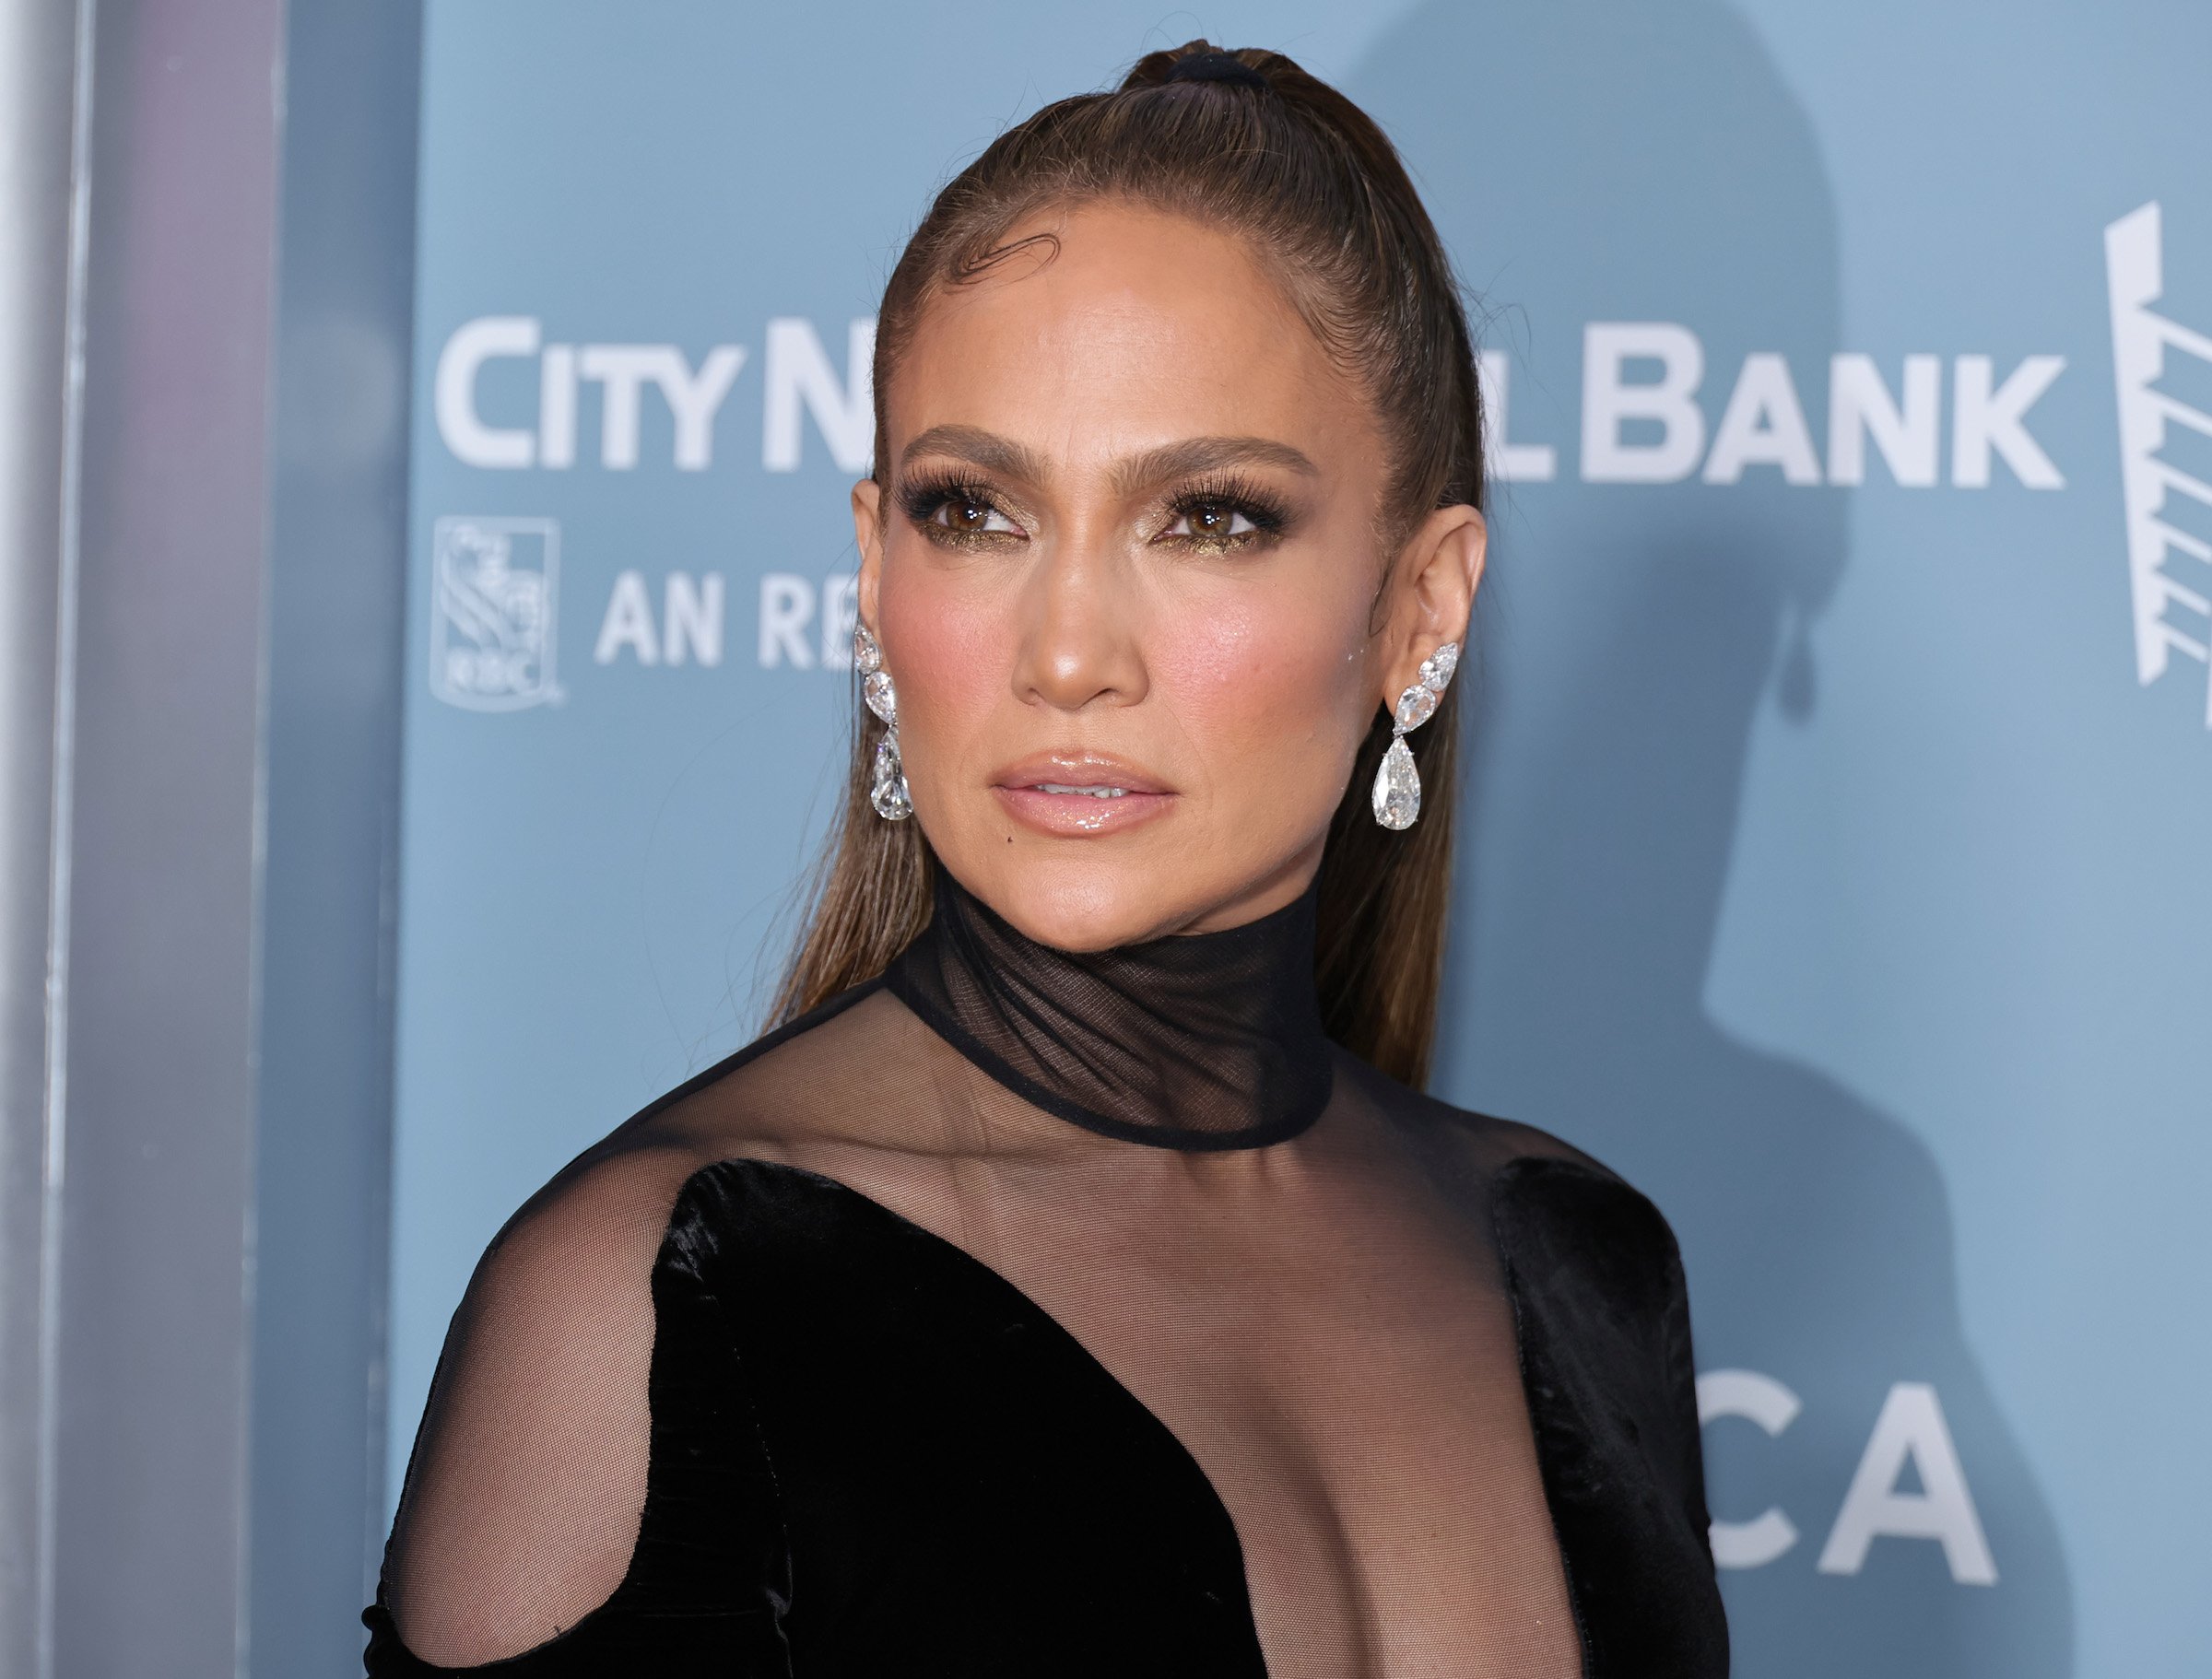 Jennifer Lopez Criticized the NFL Having 2 Headliners For the Super Bowl Halftime Show: ‘The Worst Idea in the World’